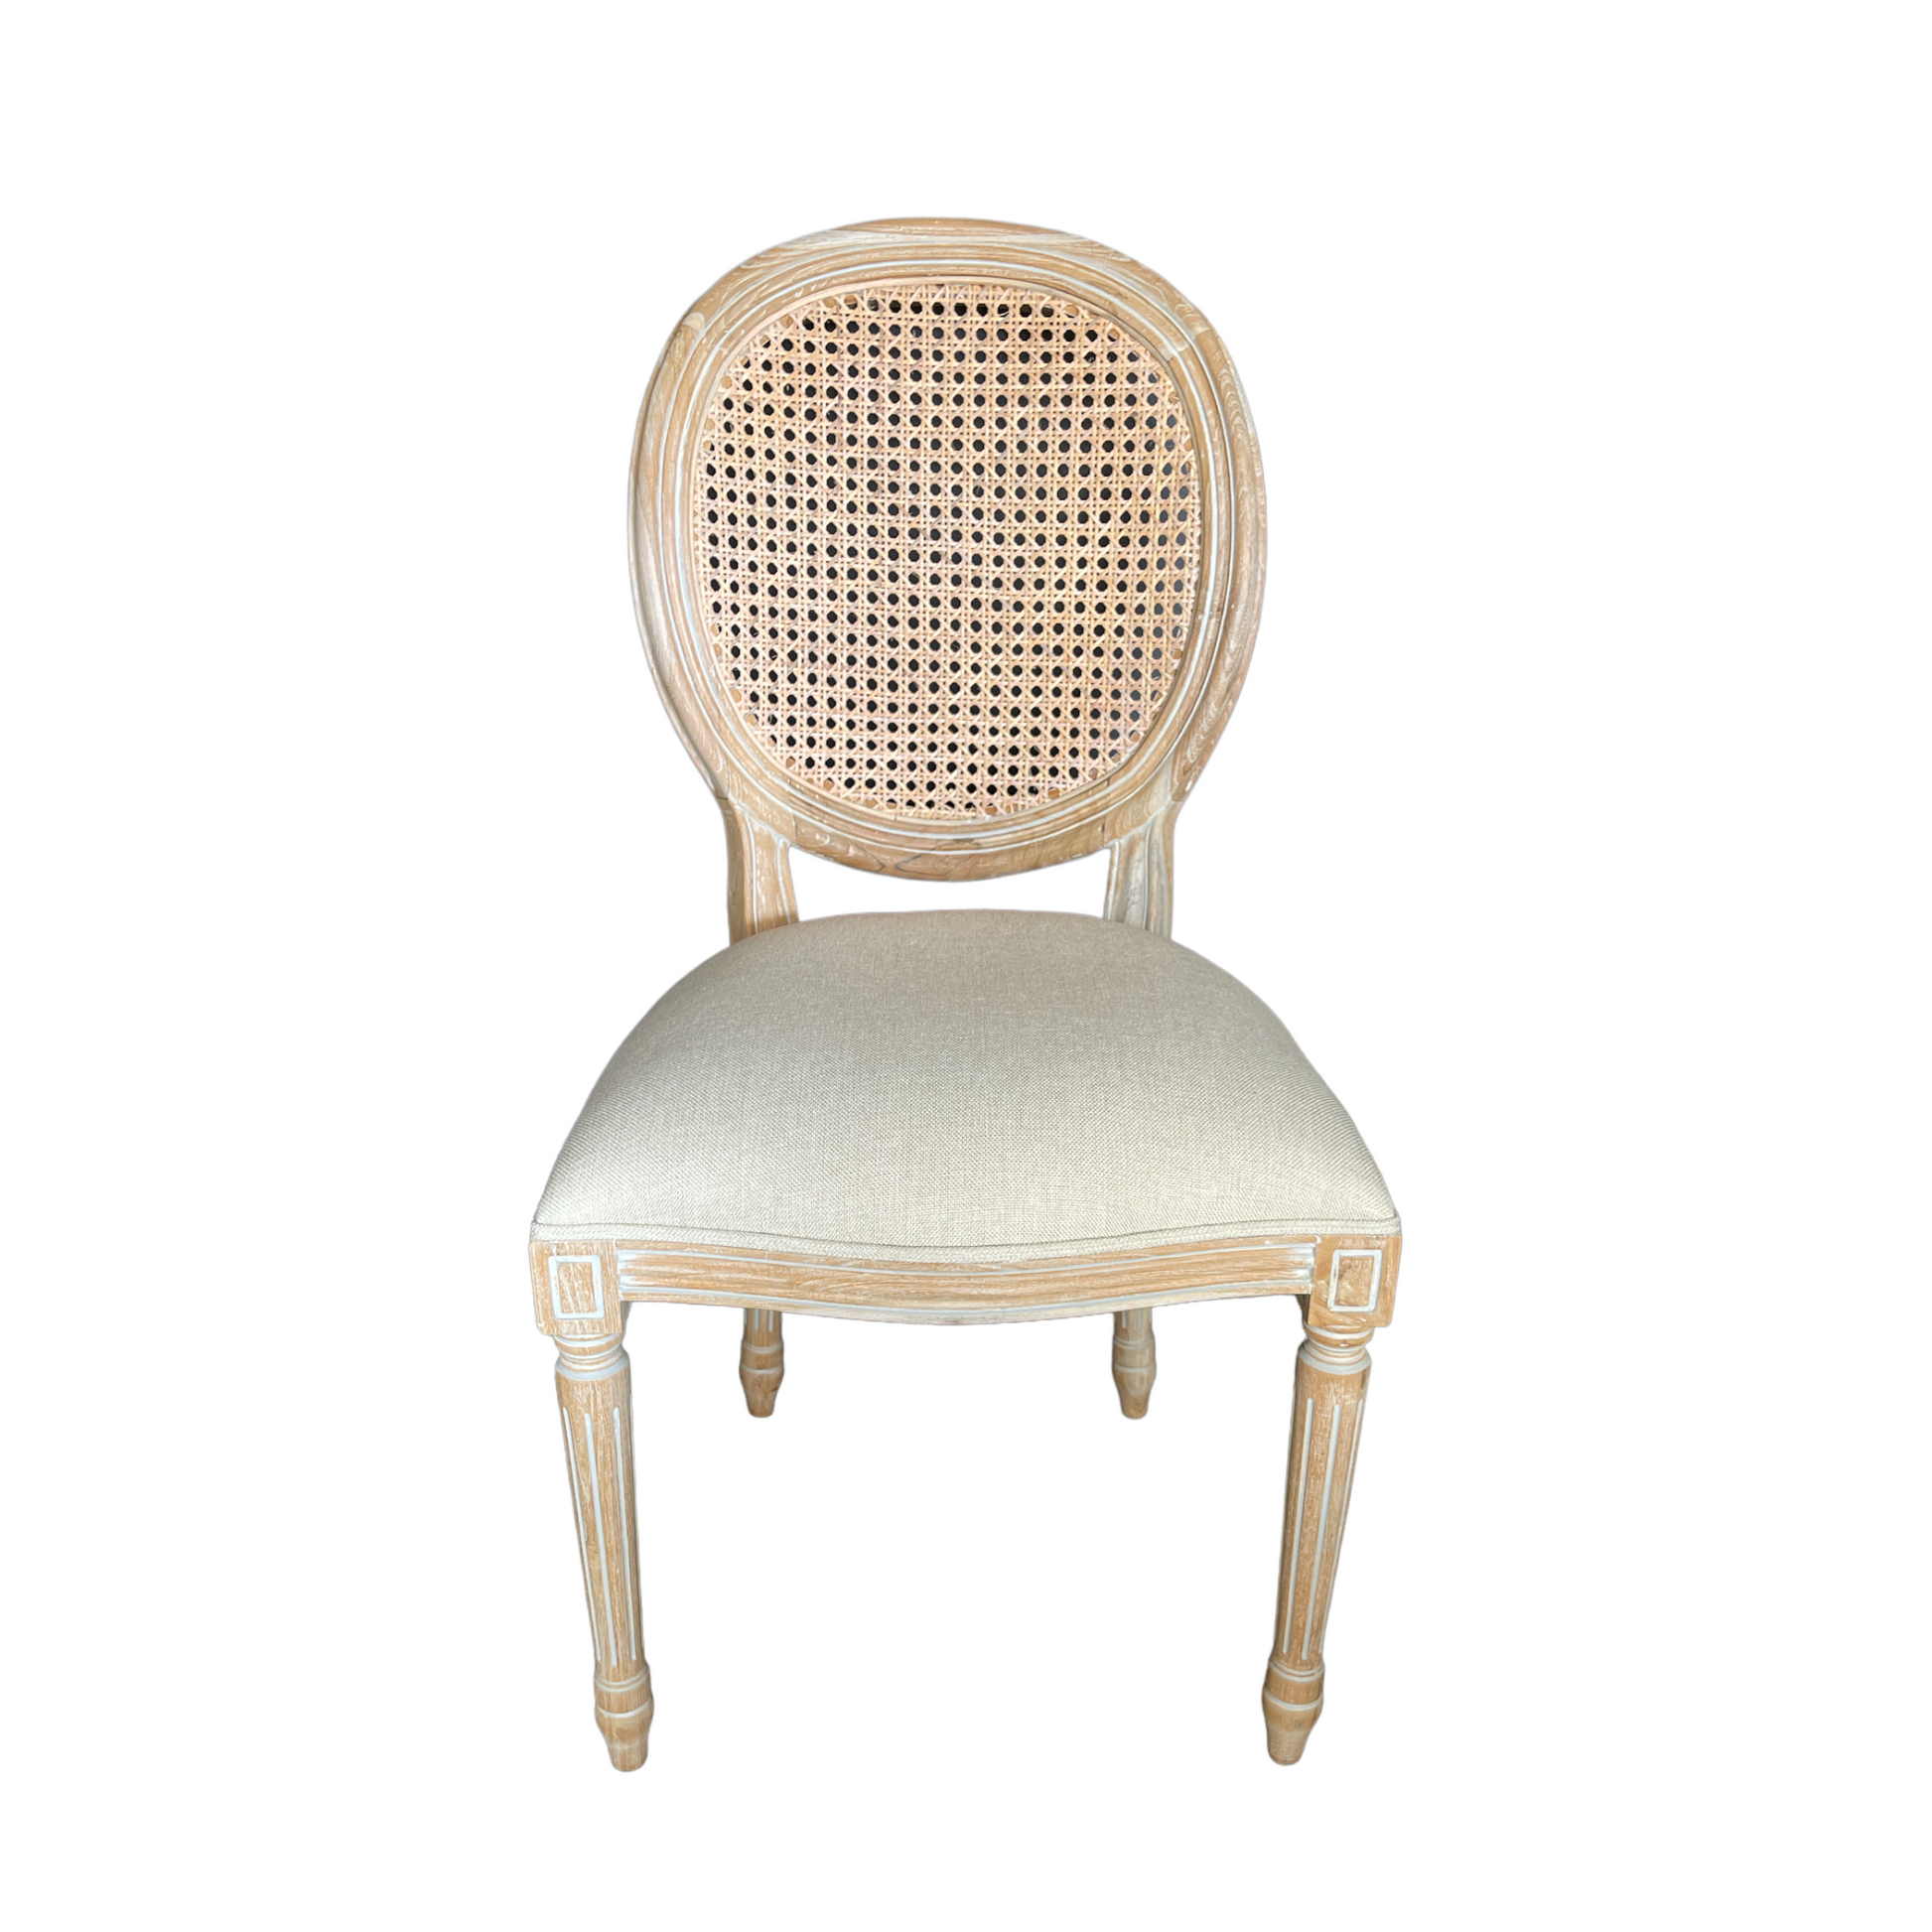 The elegant timeless Versailles Teak Rattan Chair features a weathered whitewash finish upholstered seat. Front